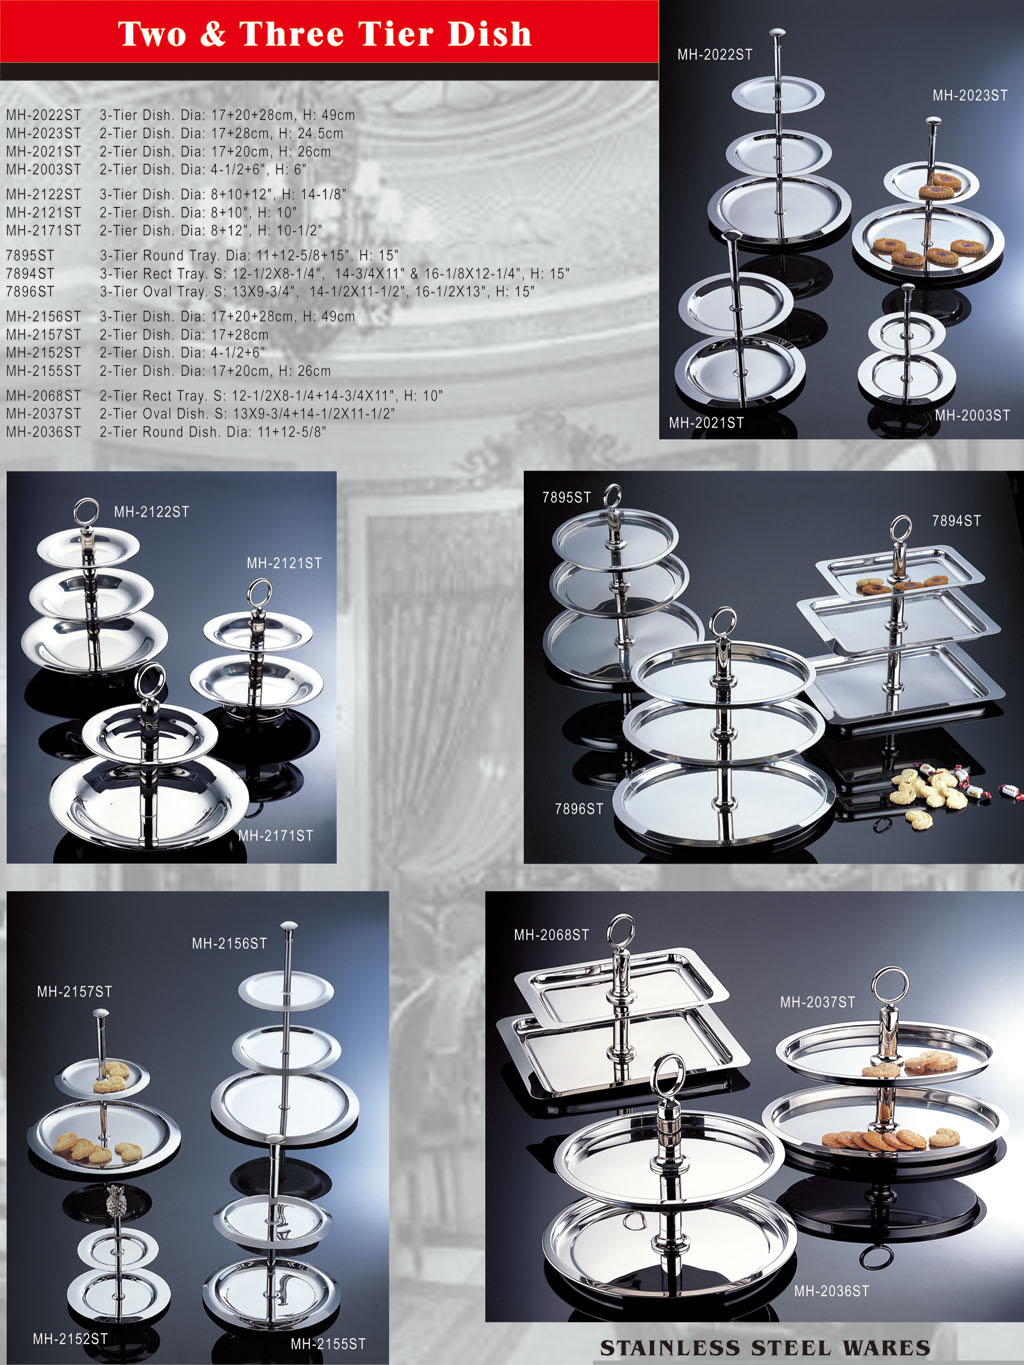 Stainless Steel Ware - Two & Three Tier Dish